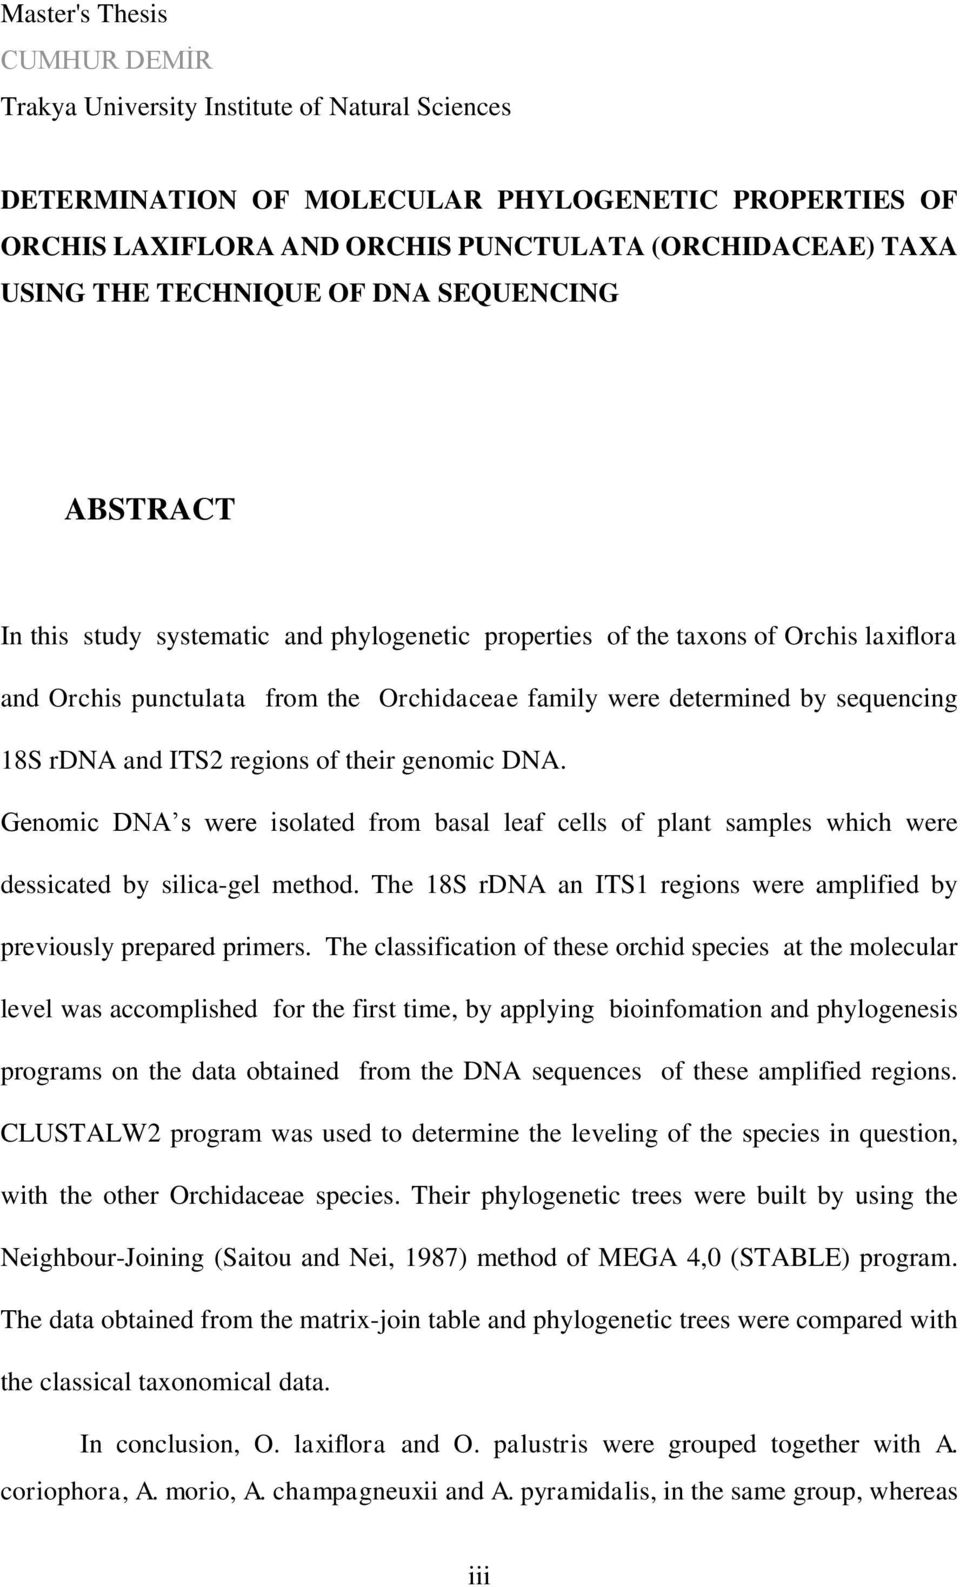 sequencing 18S rdna and ITS2 regions of their genomic DNA. Genomic DNA s were isolated from basal leaf cells of plant samples which were dessicated by silica-gel method.